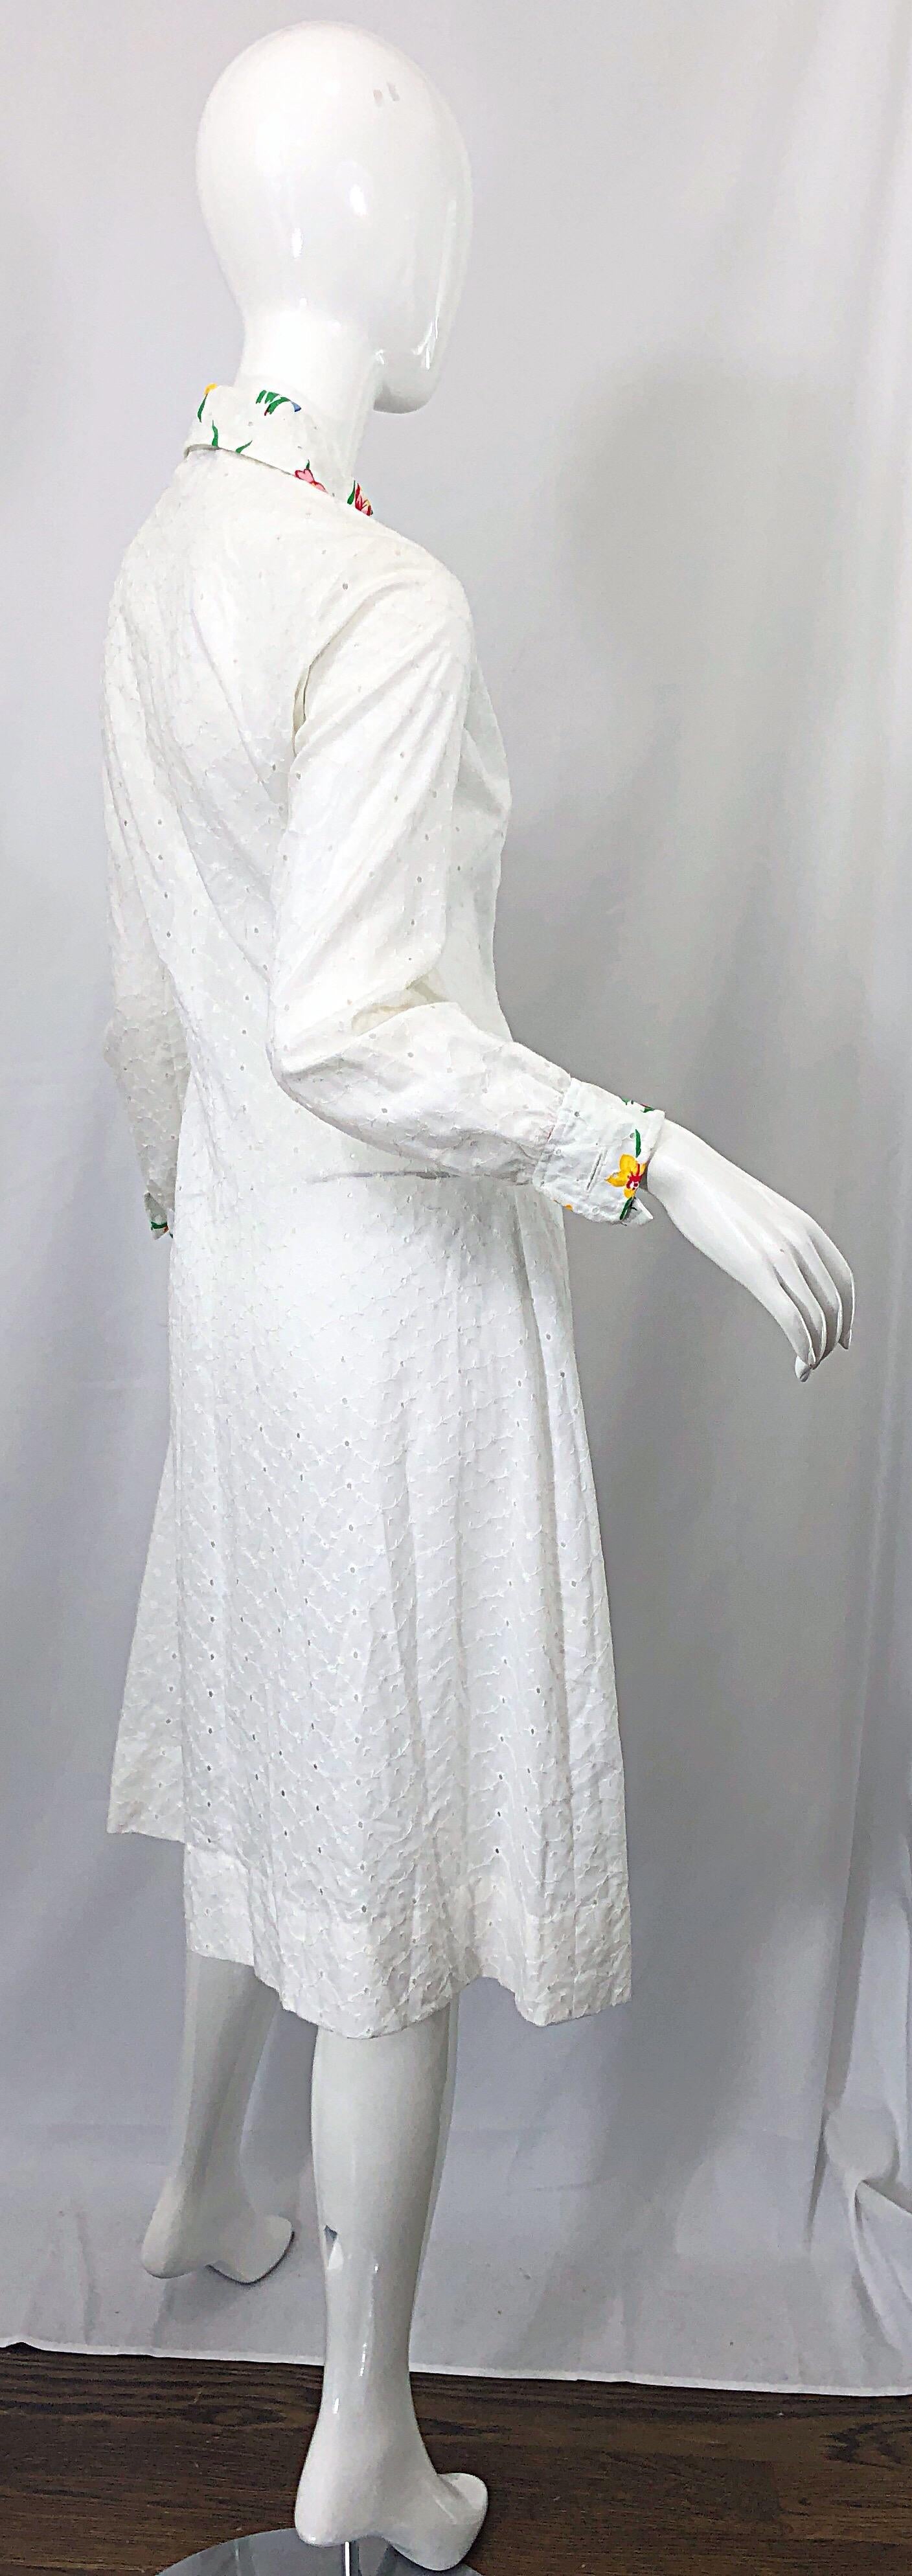 1970s Joseph Magnin White Eyelet Cotton Embrodiered Vintage 70s Shirt Dress For Sale 4